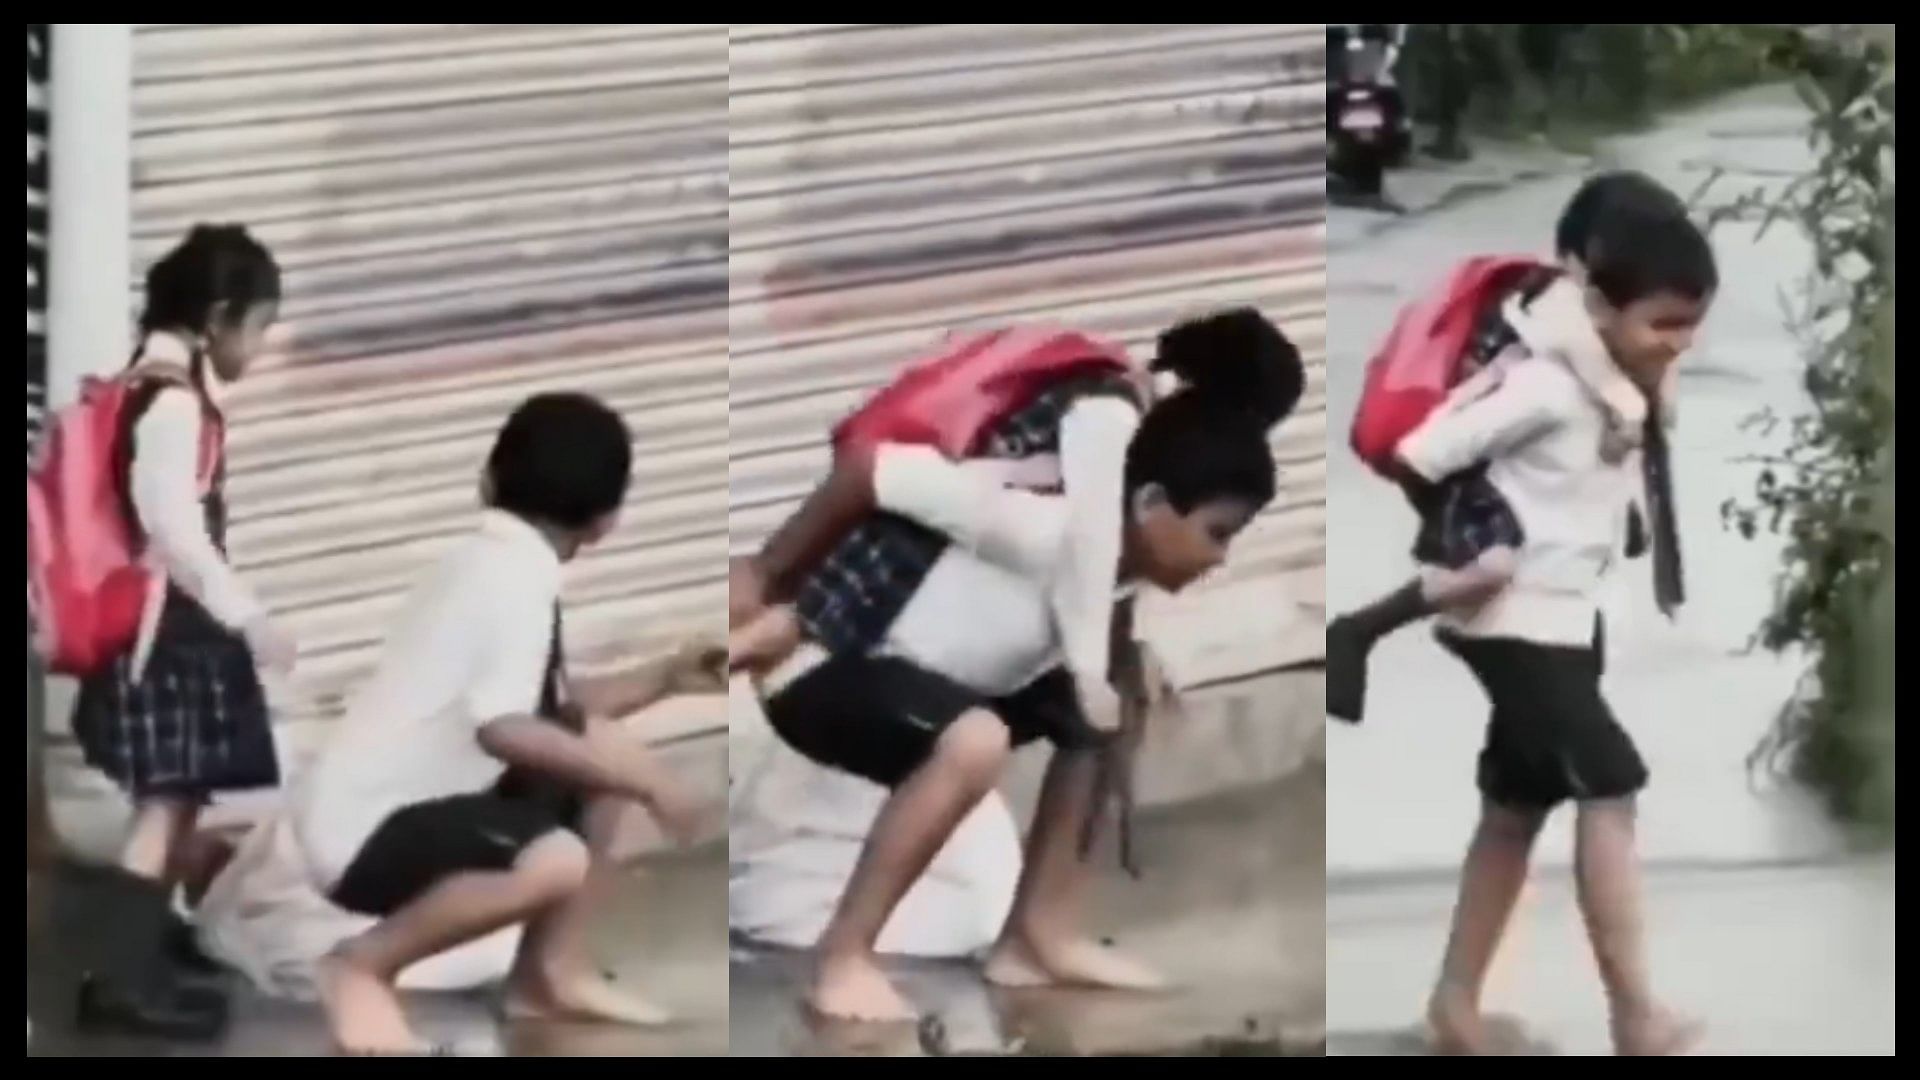 Sister shoes from getting wet the brother carried her on his back heart touching video went viral